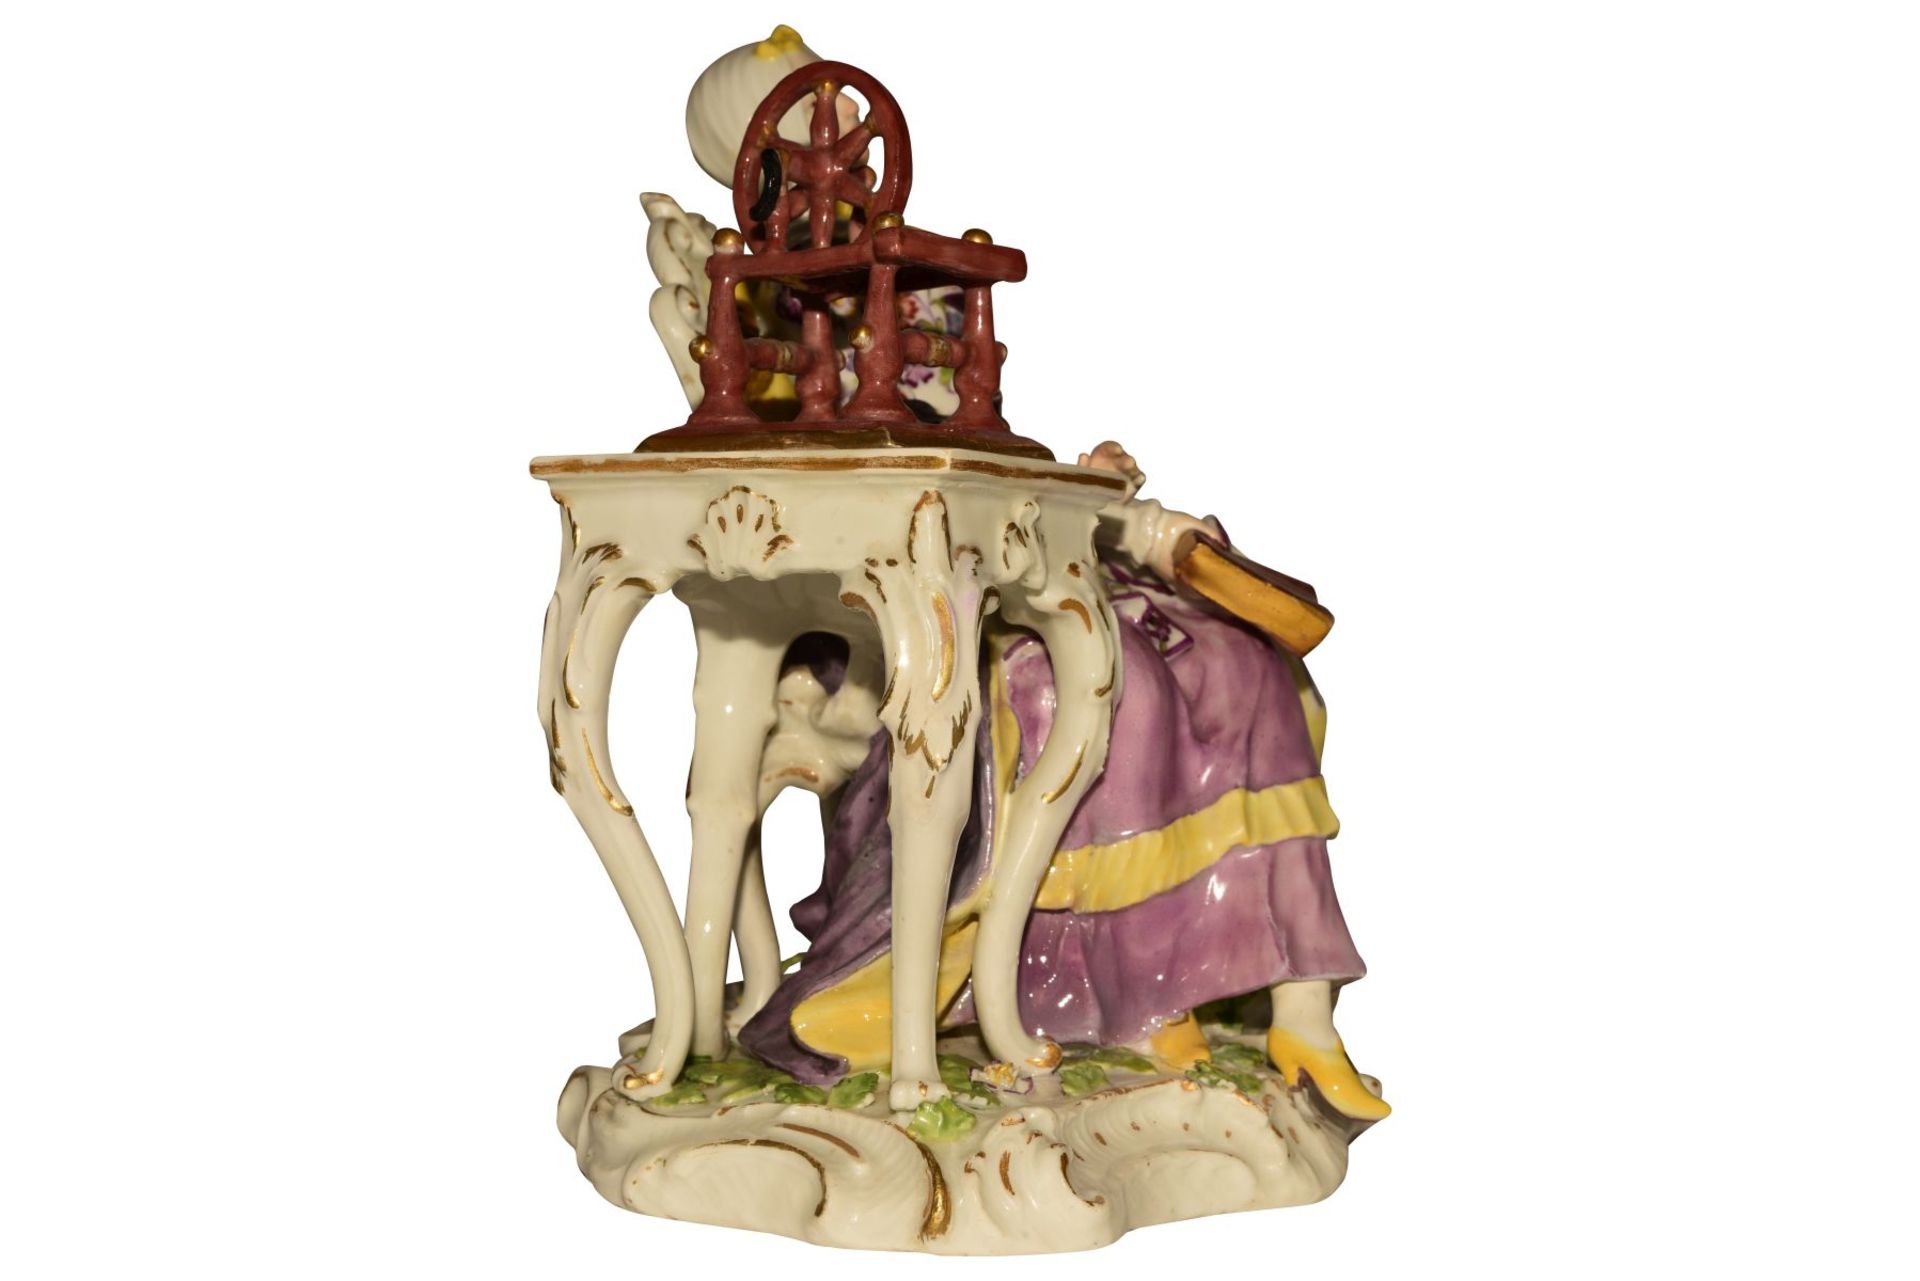 Lady with Spinning Wheel Meissen around 1750 - Image 5 of 10